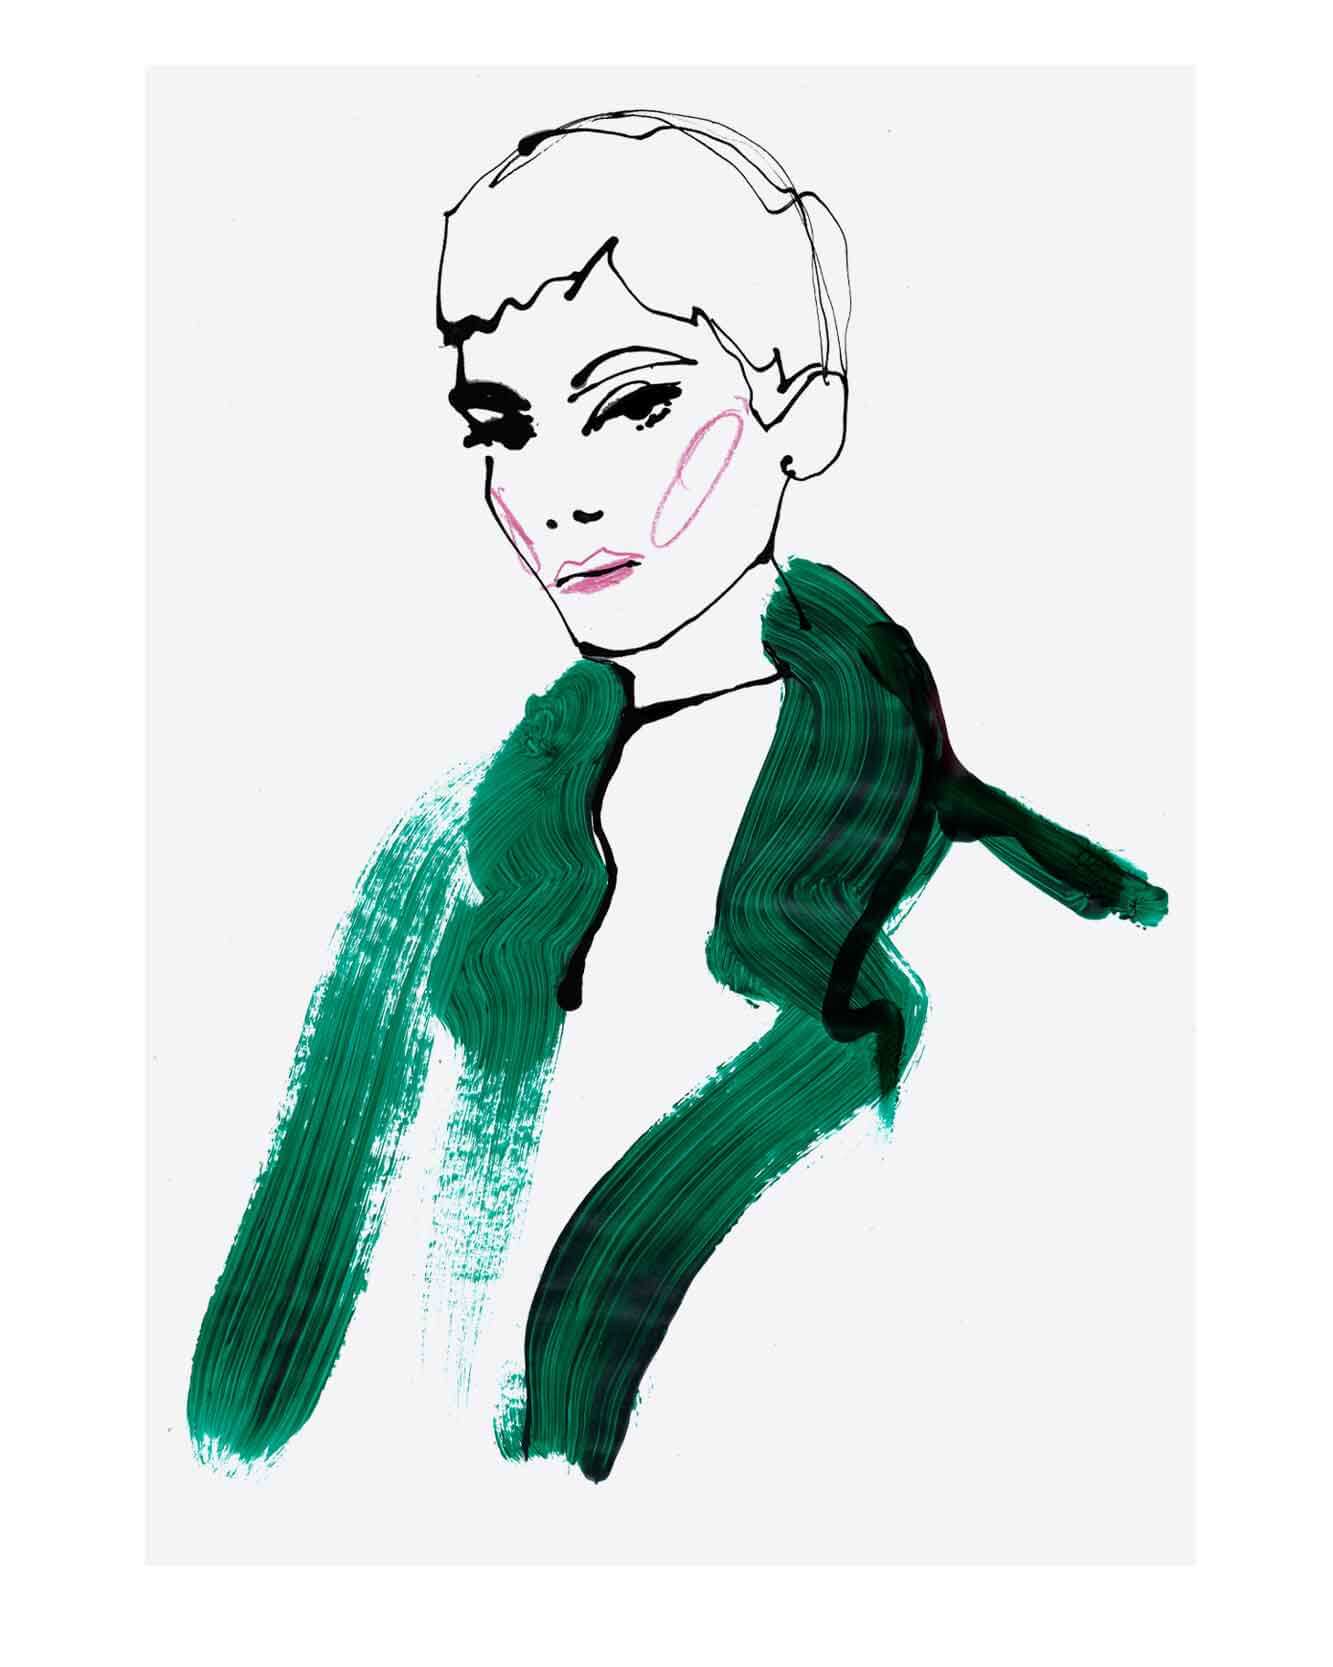 Fashion illustration in ink and watercolour. Energetic linear illustration style. Green and black lines. 